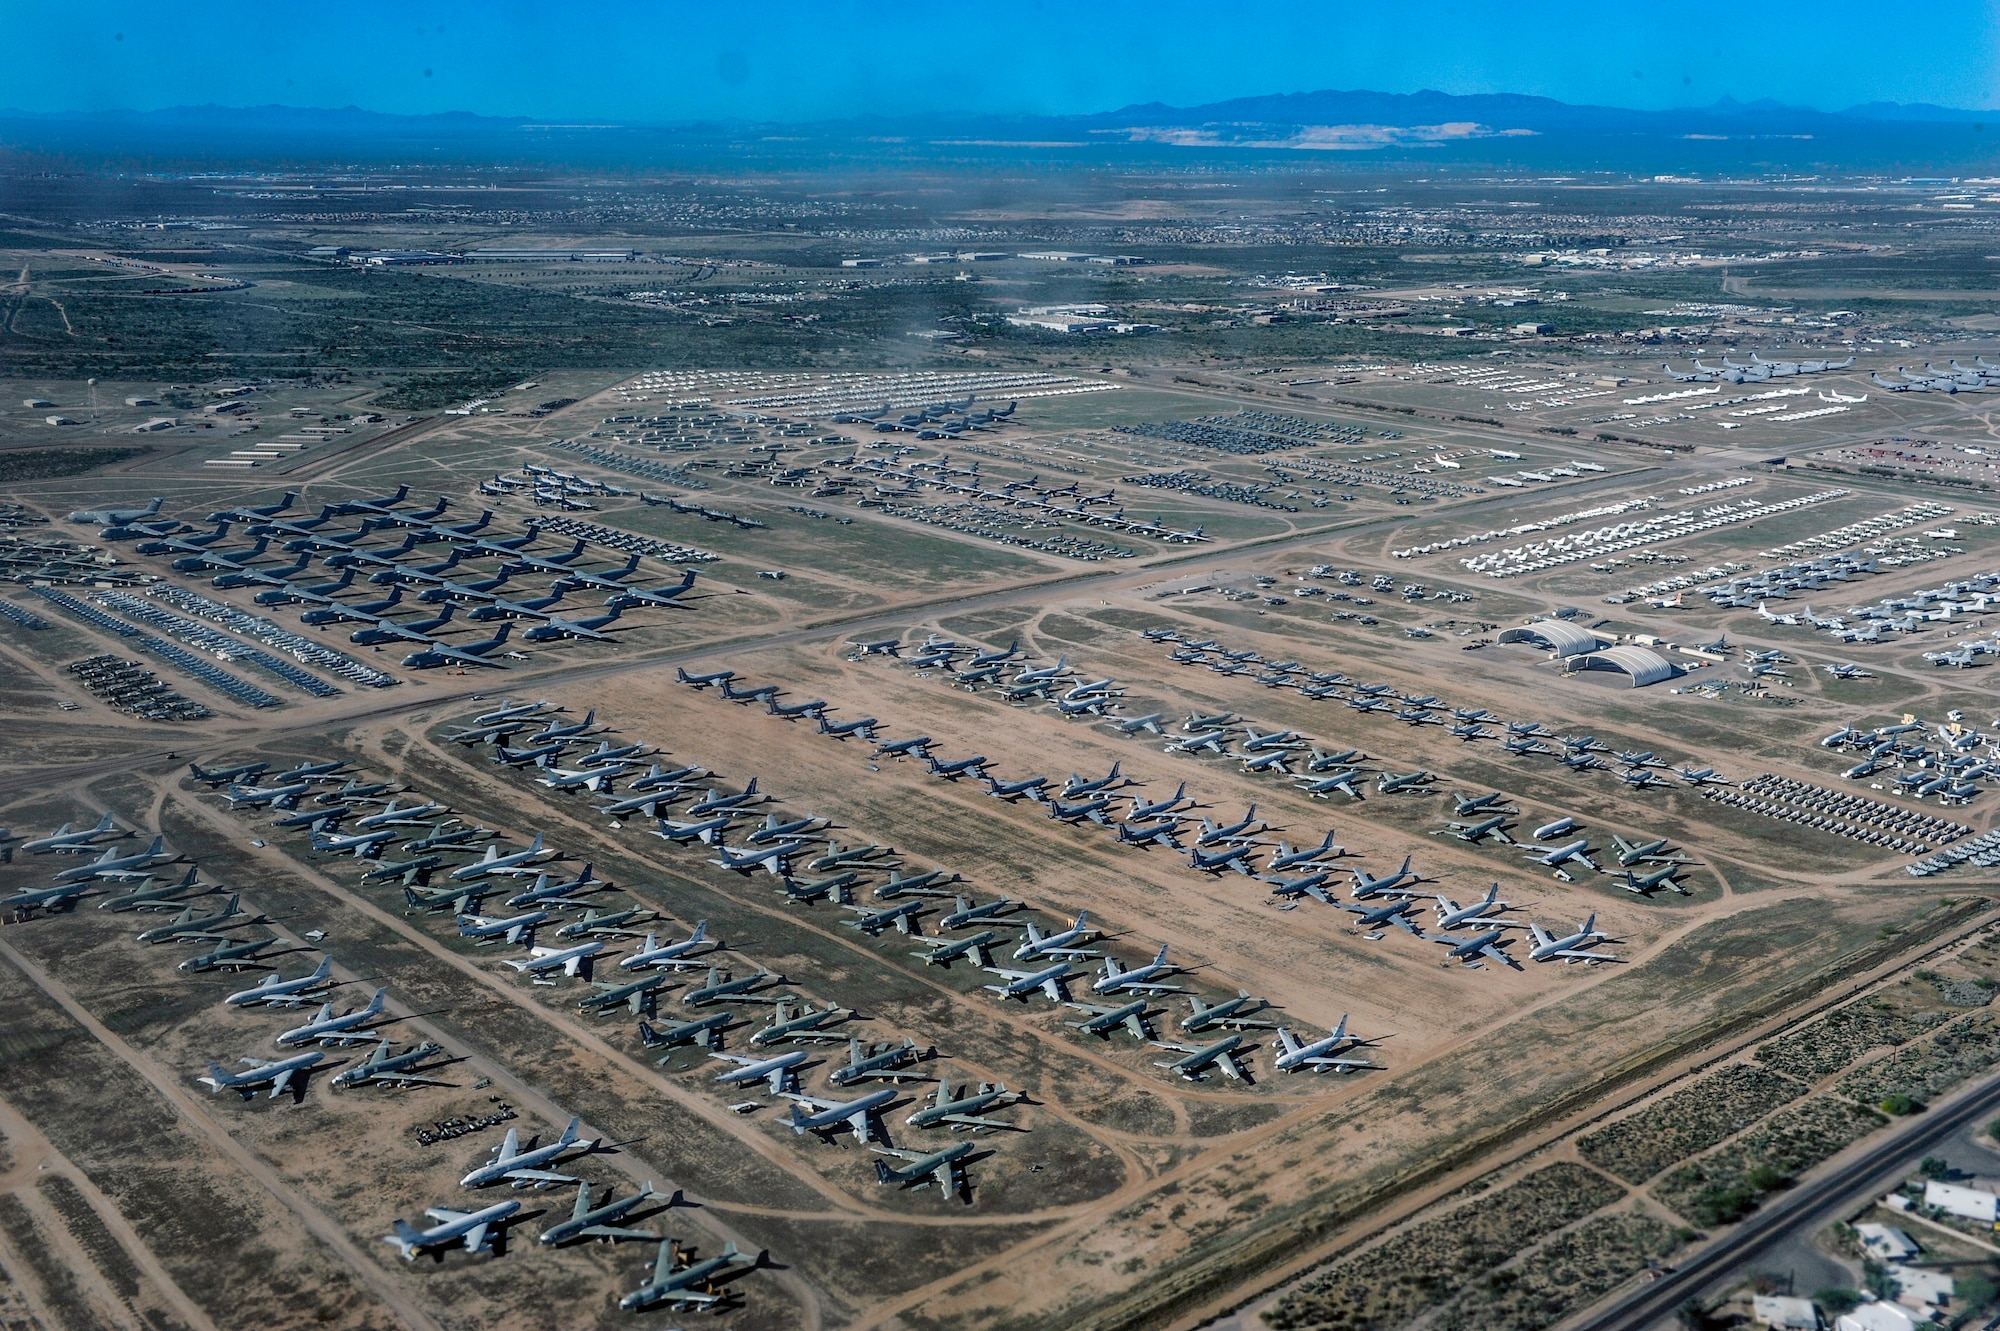 An aerial view of dozens of retired military aircraft in storage at the 309th Aerospace Maintenance and Regeneration Group, Davis-Monthan Air Force Base, Arizona.